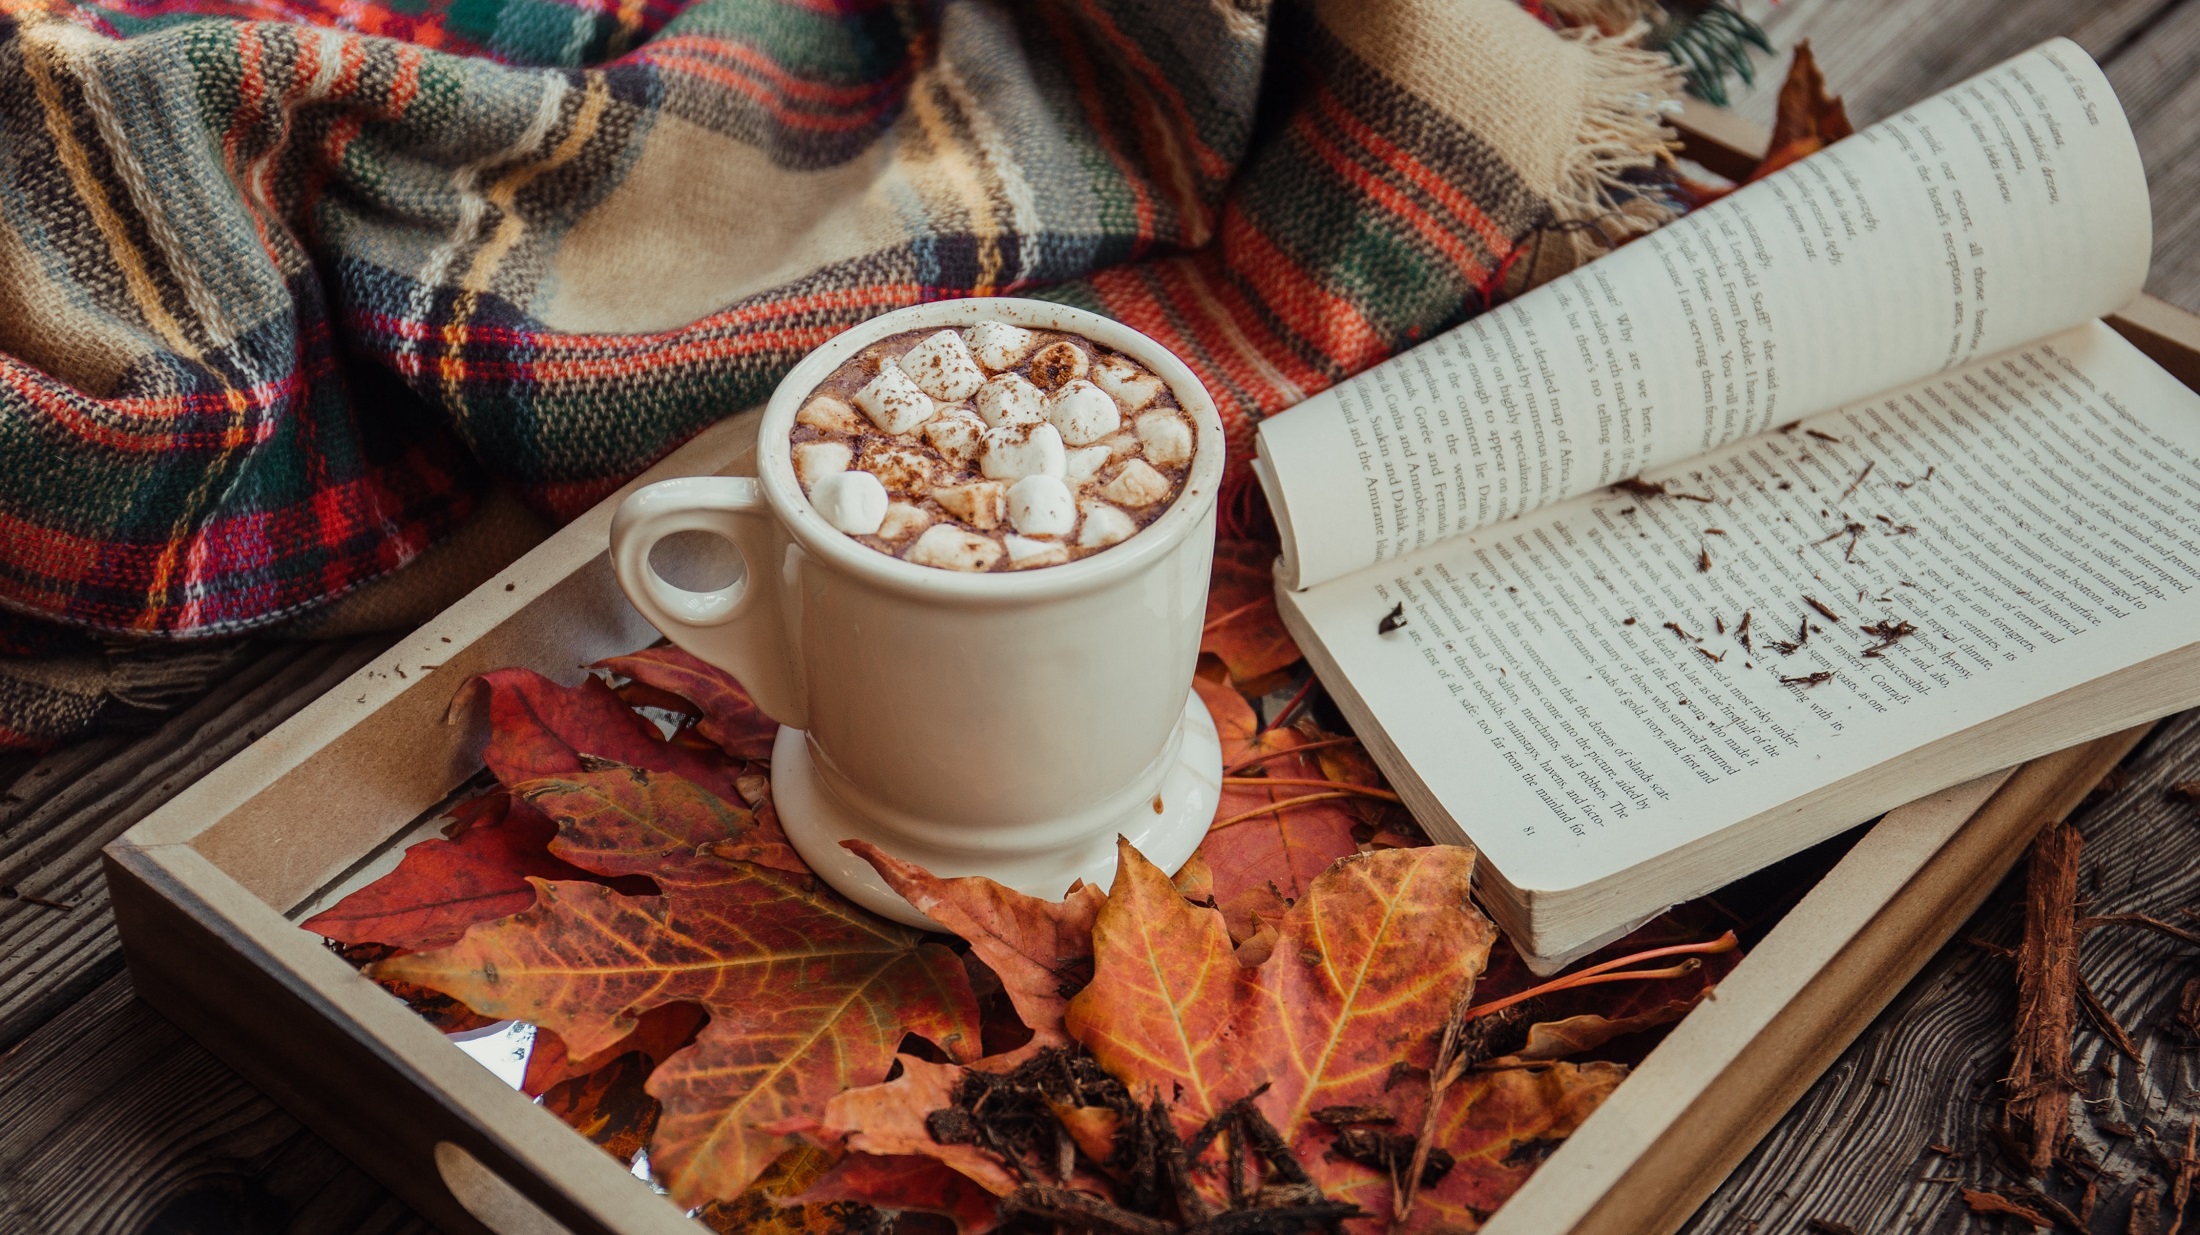 A mug of hot chocolate sits in a tray filled with autumn leaves. On one side of the mug is a plaid scarf, and on the other is an open book.